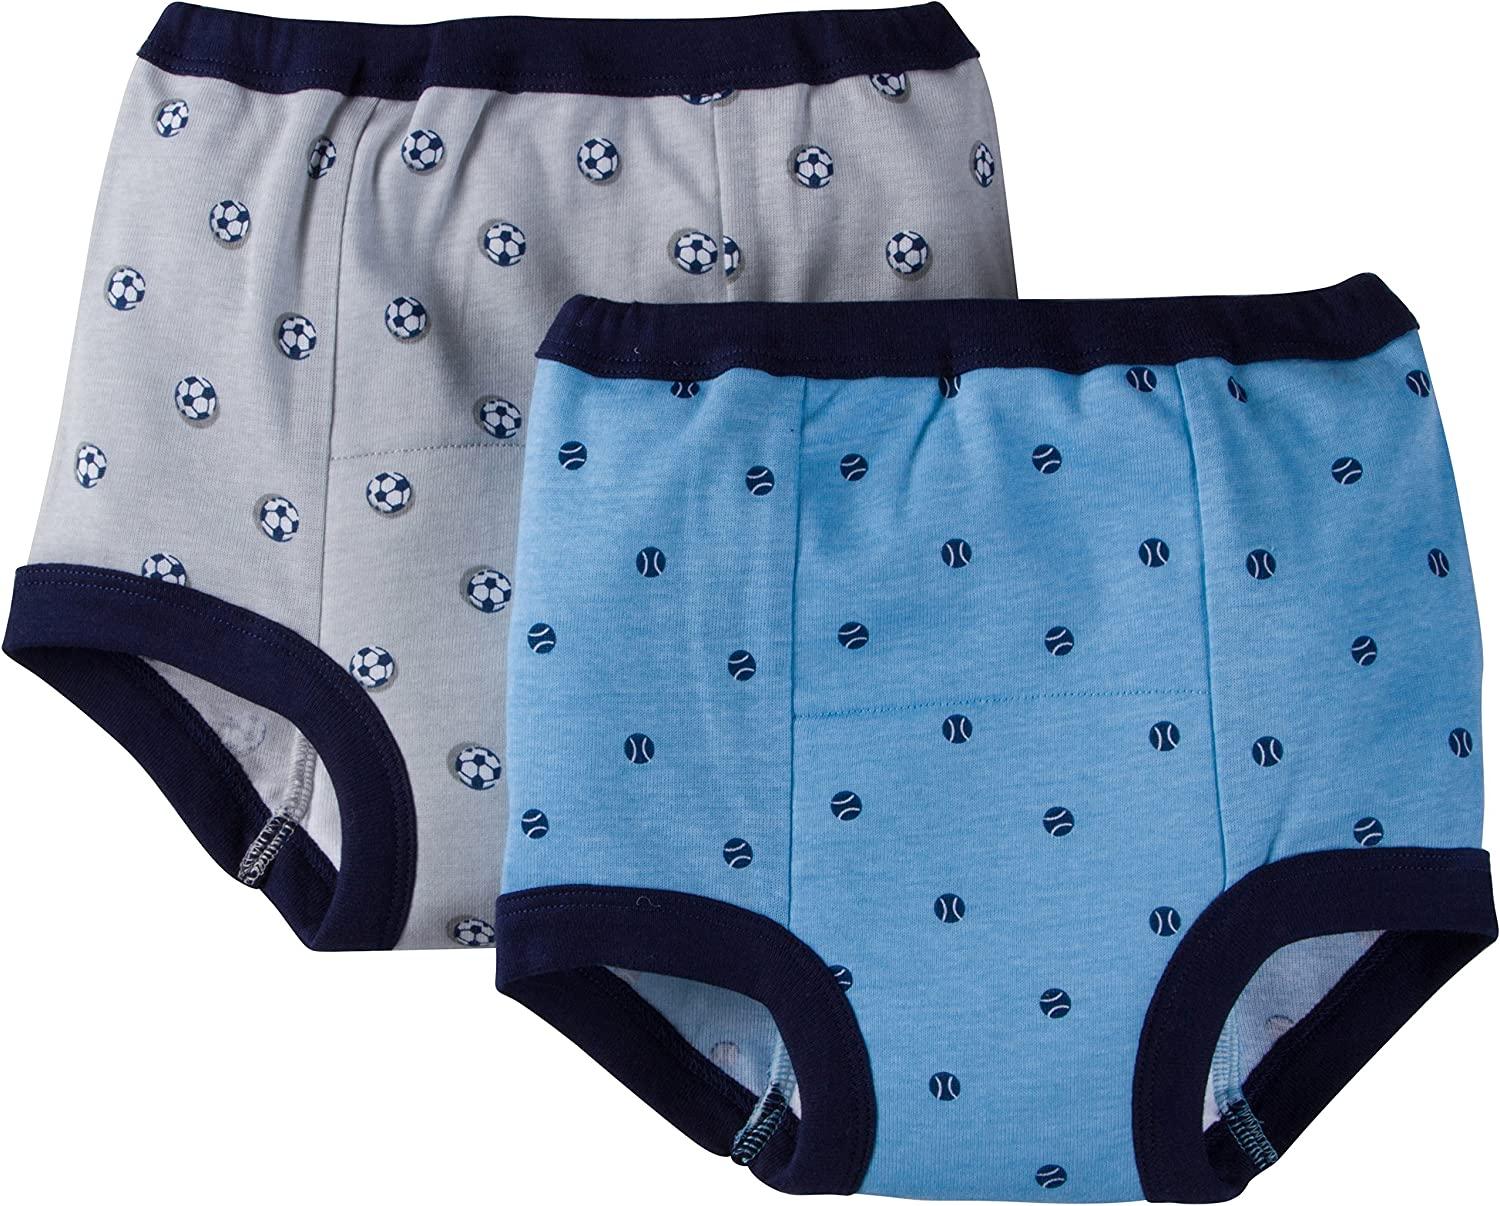  Gerber Potty Training Pants White 2T (3-pack) : Clothing, Shoes  & Jewelry